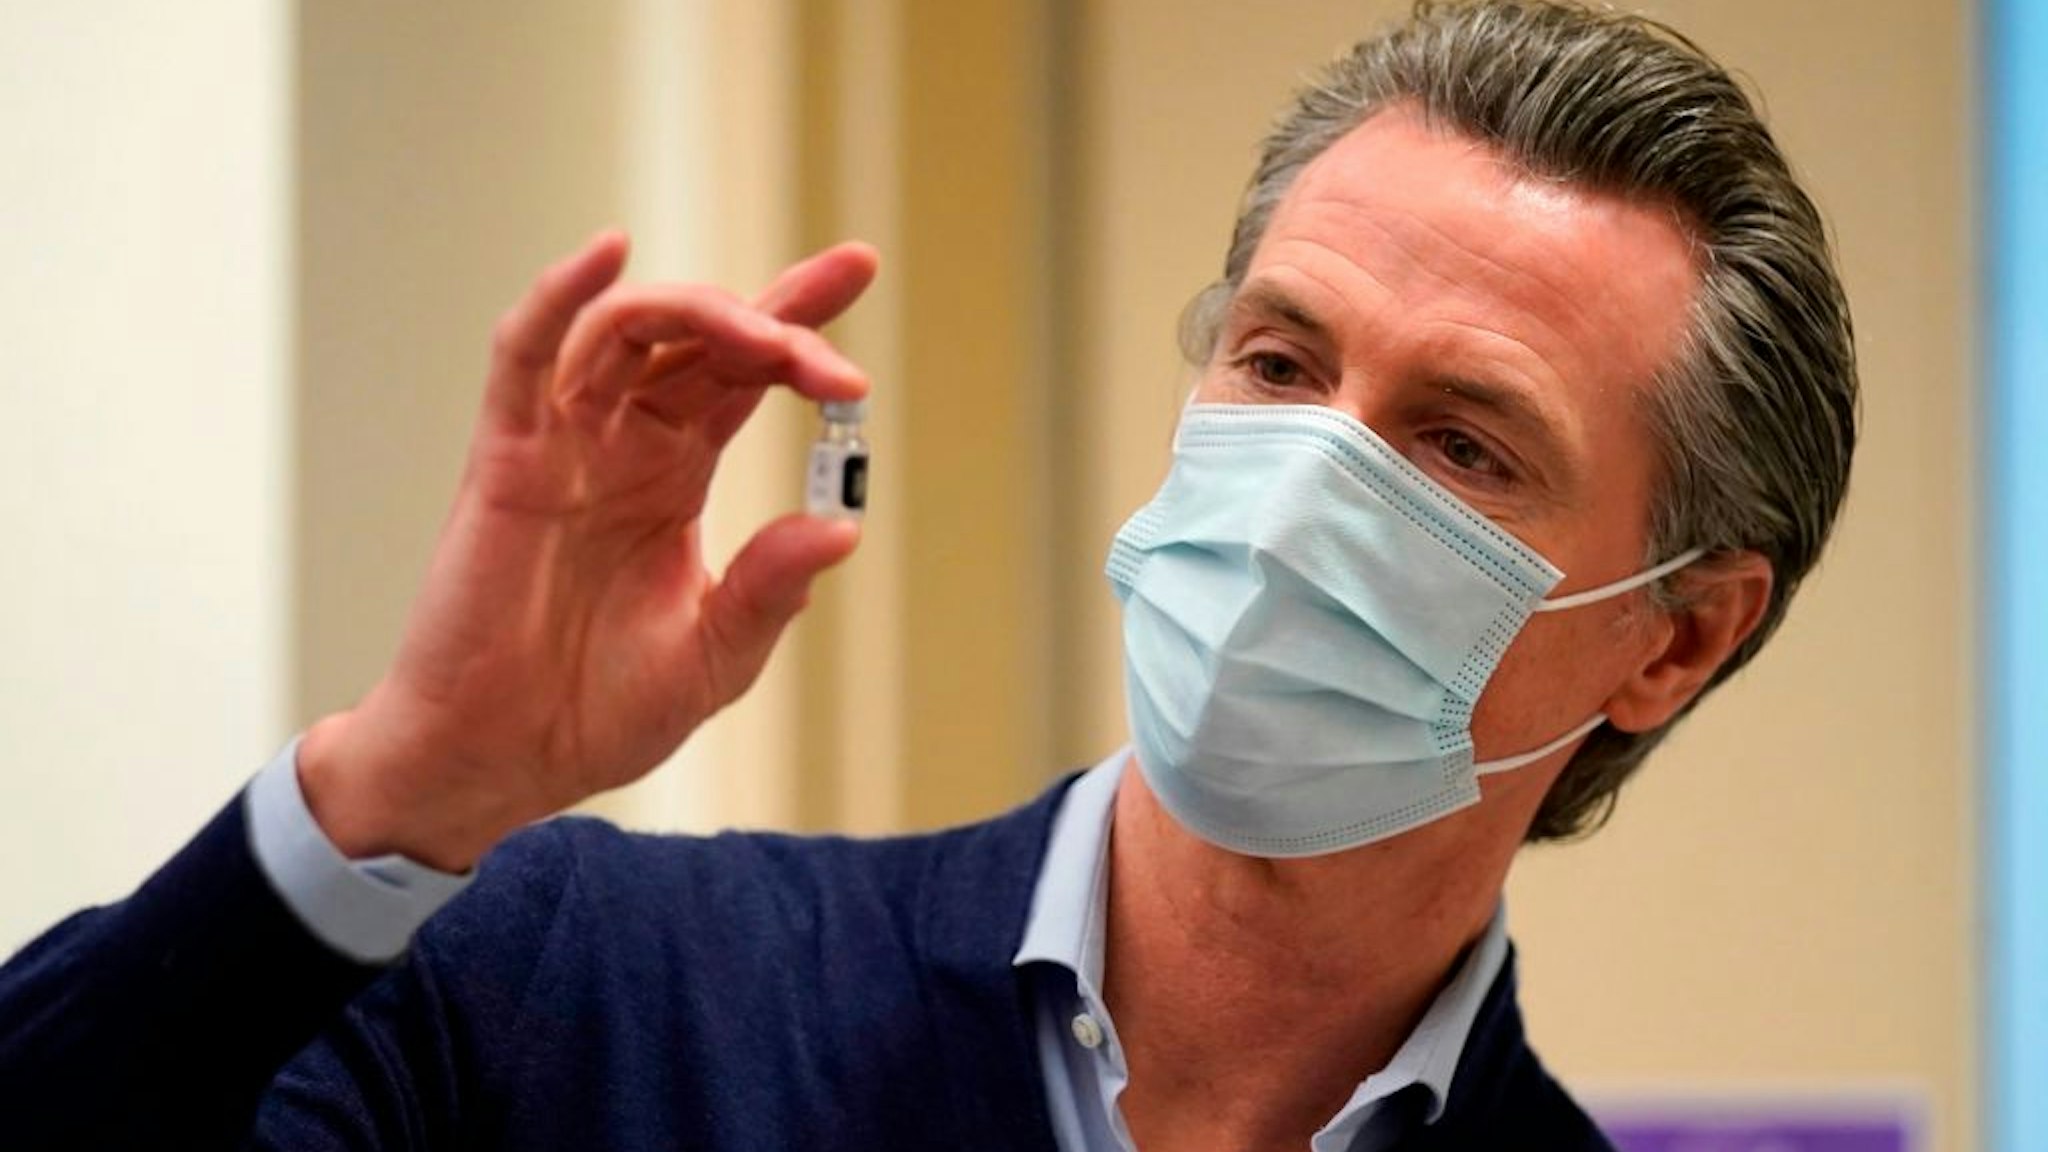 Governor Gavin Newsom holds up a vial of the Pfizer-BioNTech COVID-19 vaccine at Kaiser Permanente Los Angeles Medical Center in Los Angeles, California on December 14, 2020. - The United States kicked off a mass vaccination drive Monday hoping to turn the tide on the world's biggest coronavirus outbreak, as the country's death toll neared a staggering 300,000. (Photo by Jae Hong / POOL / AFP) (Photo by JAE HONG/POOL/AFP via Getty Images)